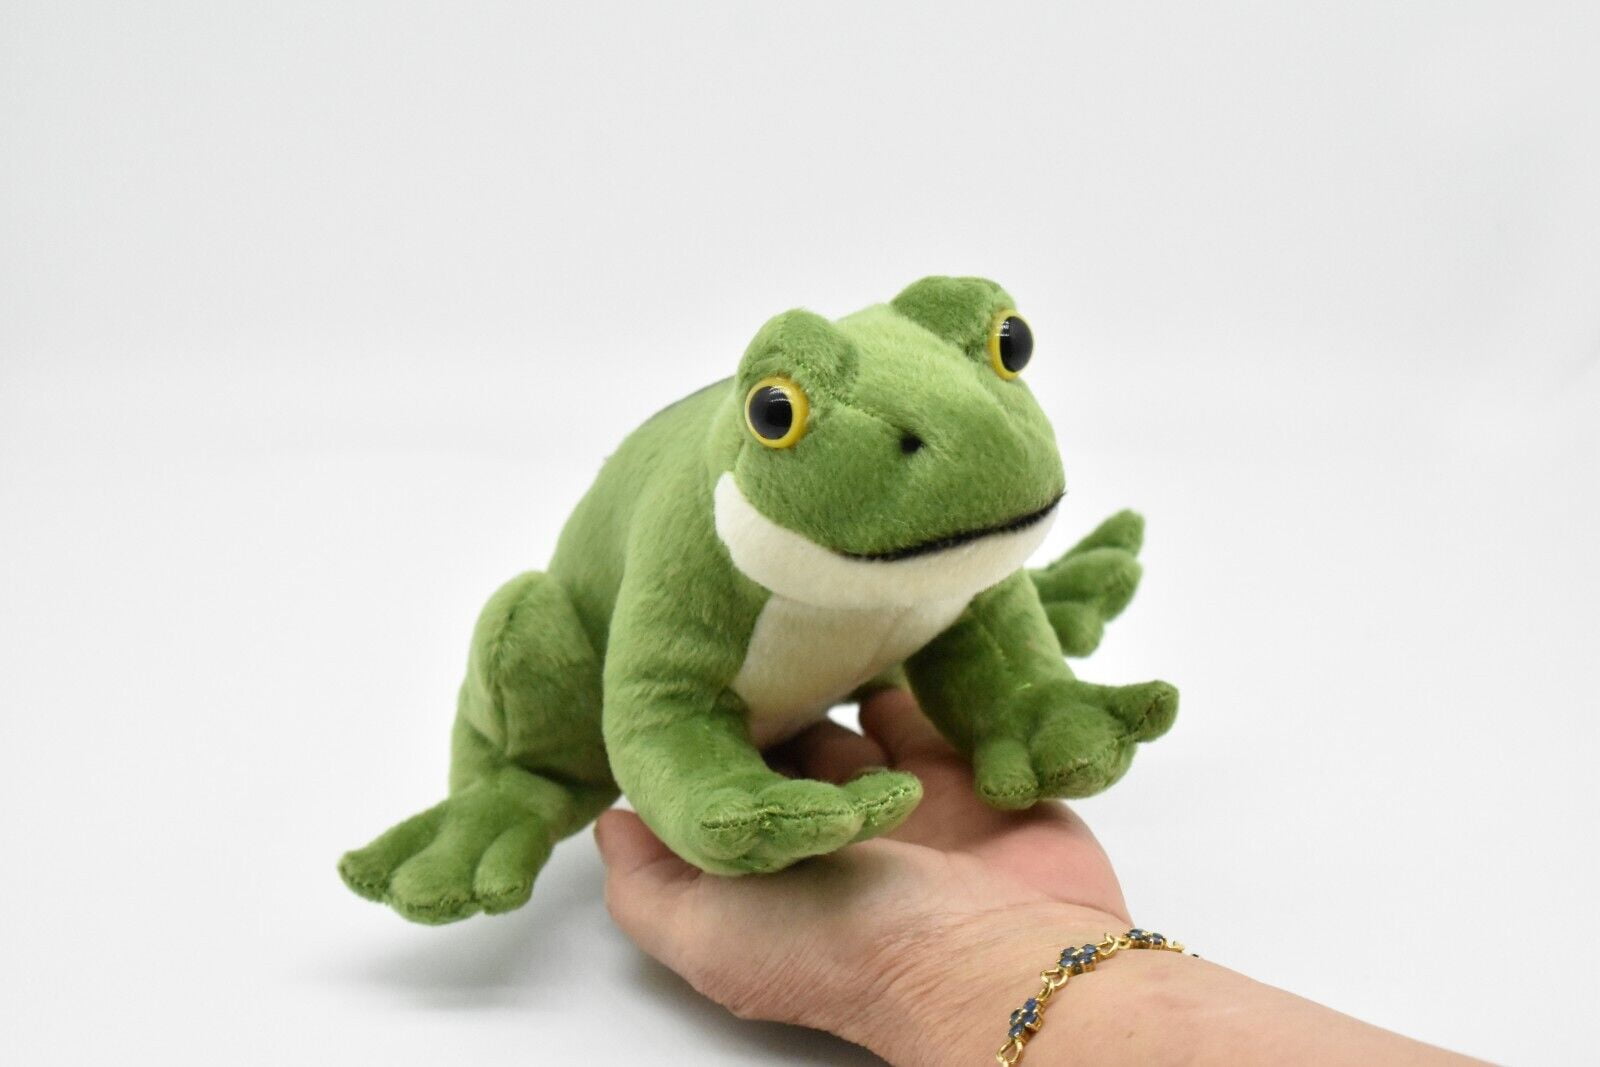 Walmart Happy Frog Plush 8.5 Stuffed Animal Doll For All Ages Spots Sitting